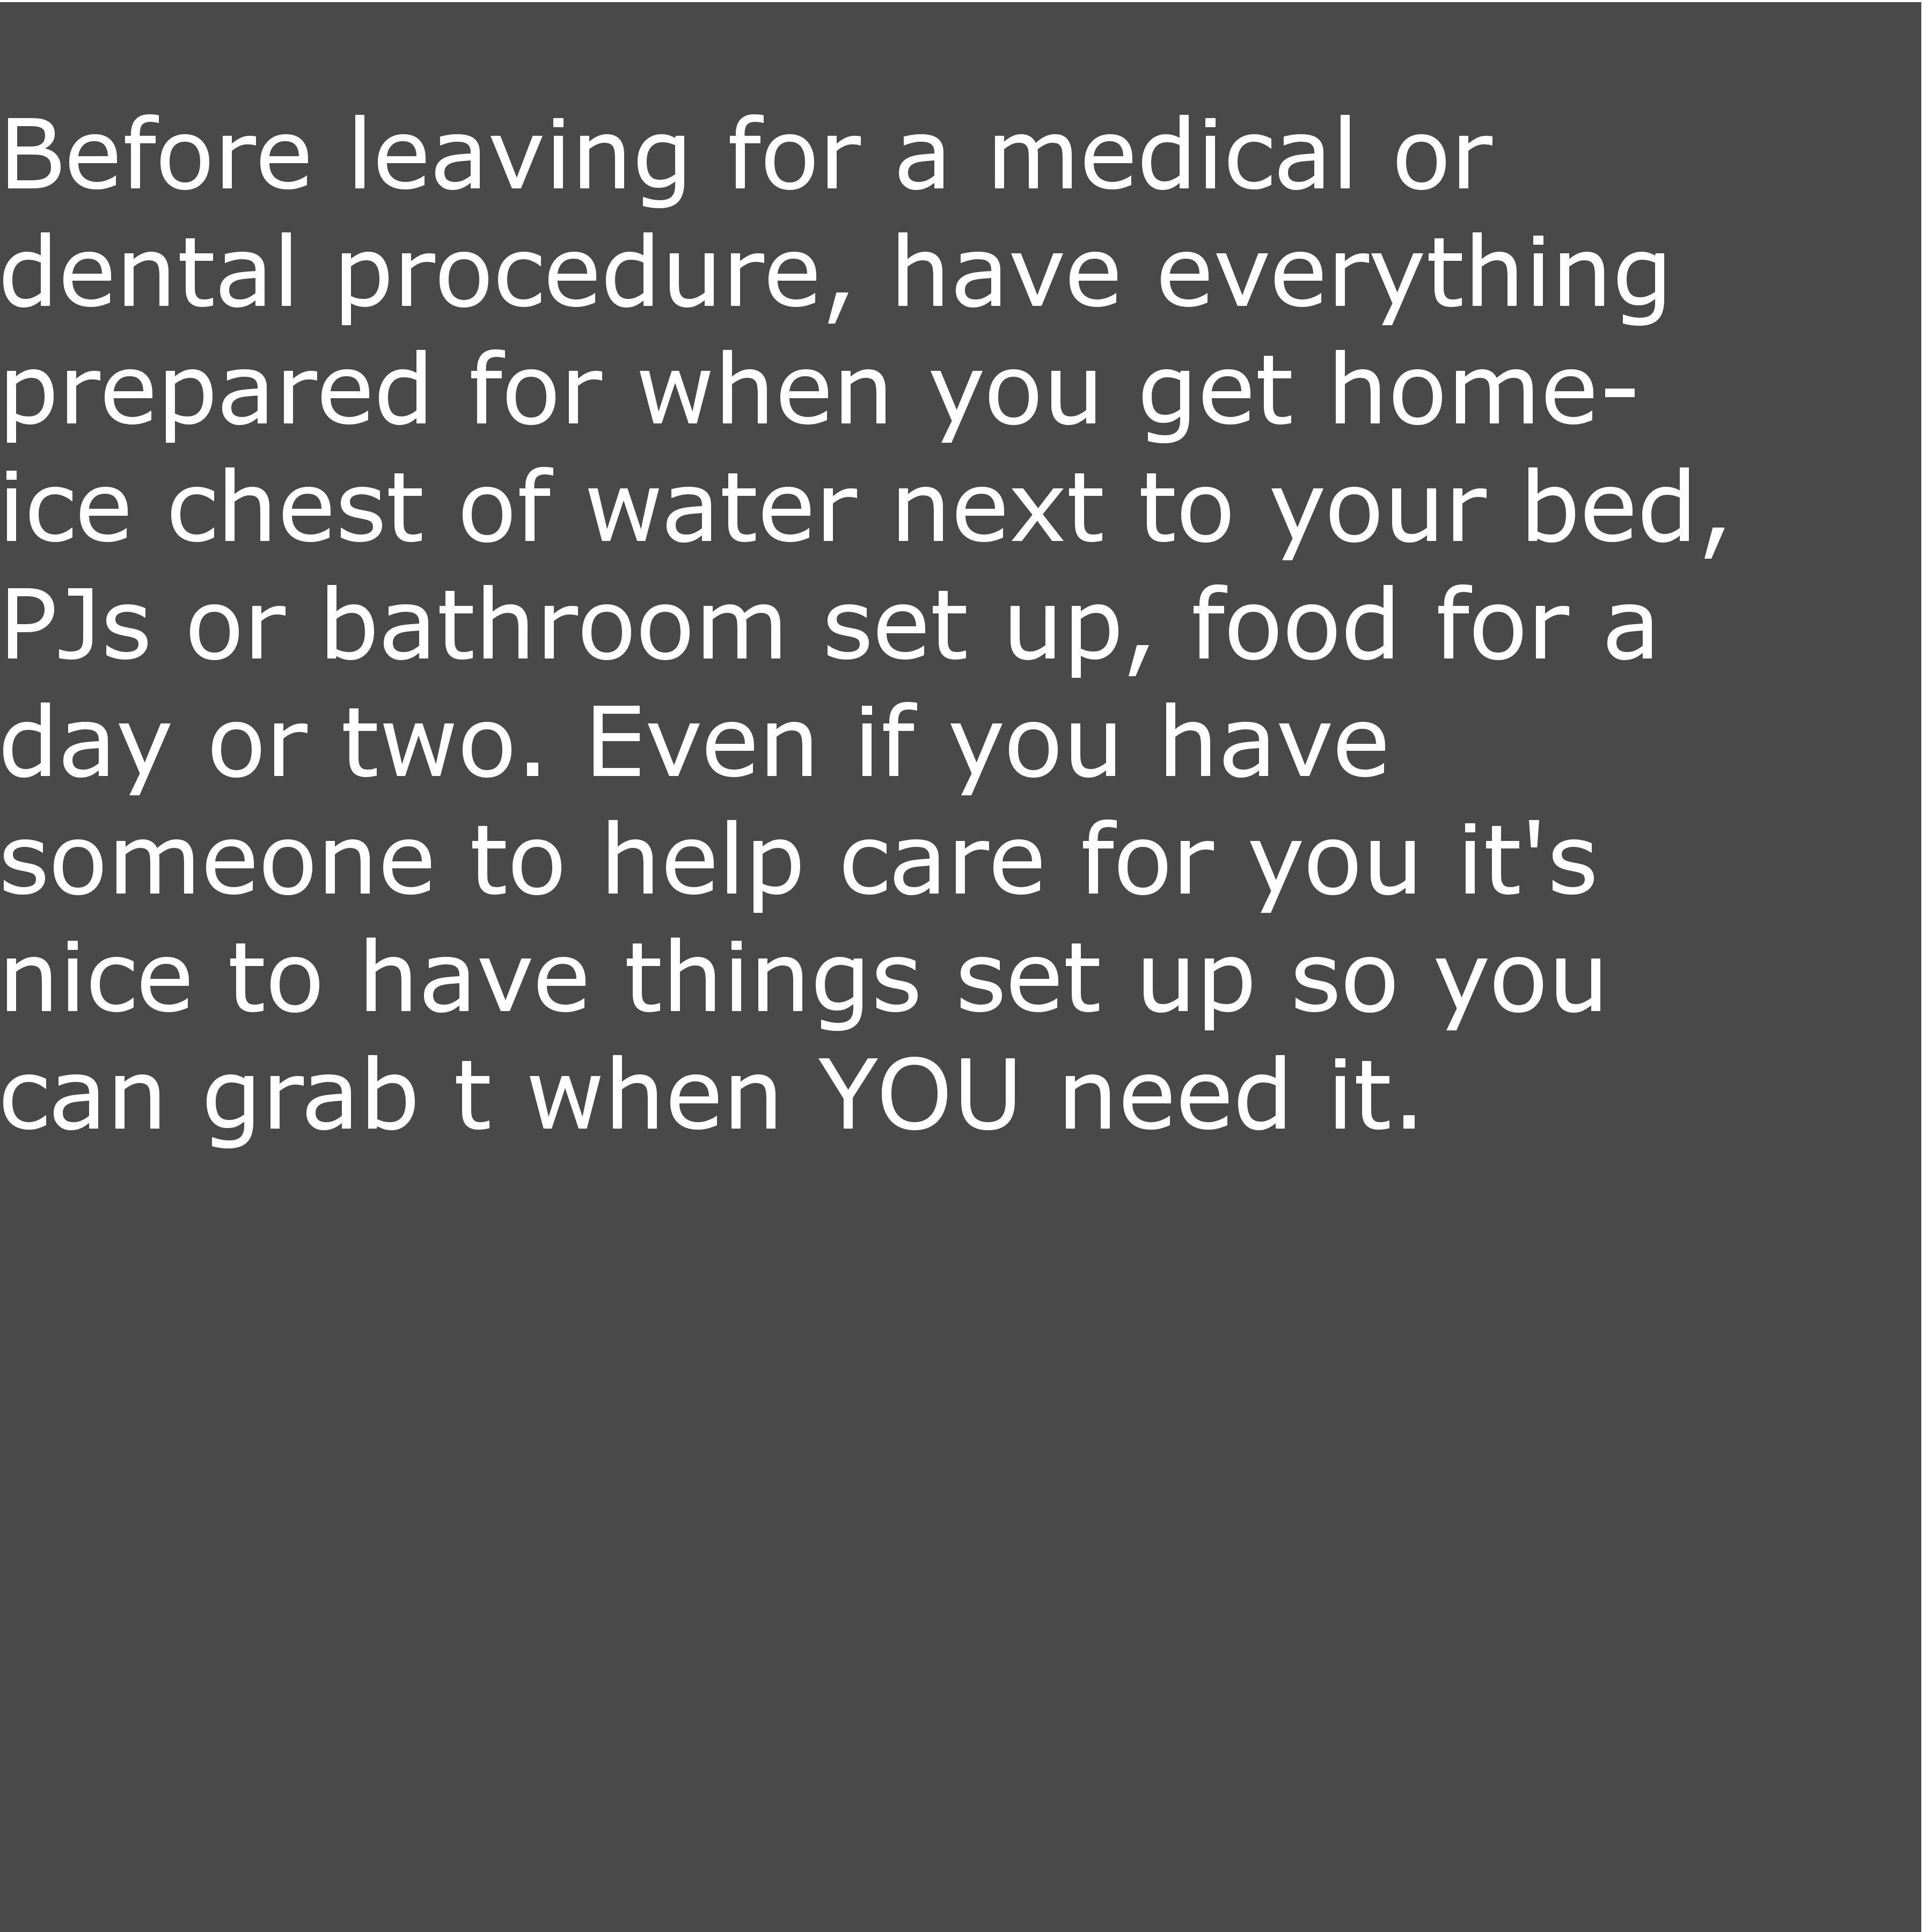 angle - Before leaving for a medical or dental procedure, have everything prepared for when you get home ice chest of water next to your bed, PJs or bathroom set up, food for a day or two. Even if you have someone to help care for you it's inice to have t